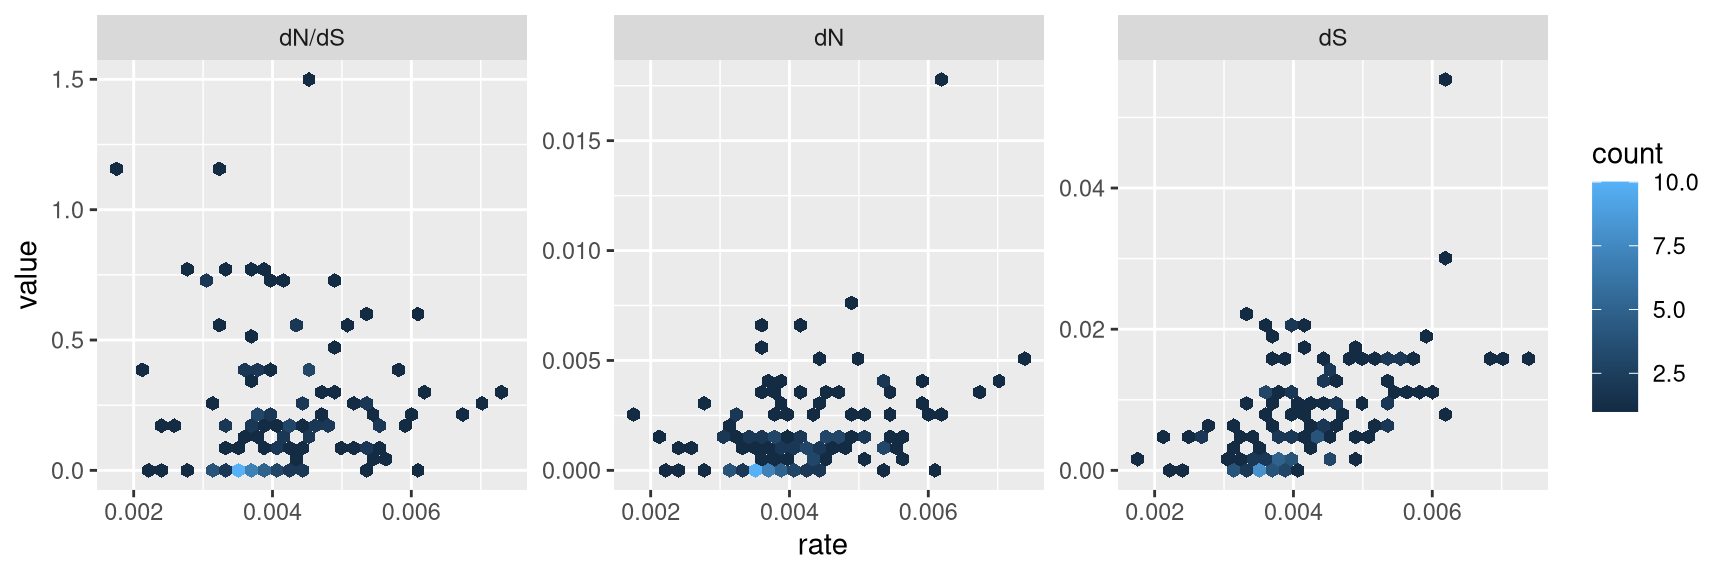 Correlation of dN/dS, dN and dS versus substitution rate. After merging the BEAST and CodeML outputs, the branch-specific estimates (substitution rate, dN/dS , dN and dS) from the two analysis programs are compared on the same branch basis. The associations of dN/dS, dN and dS vs. rate are visualized in hexbin scatter plots.